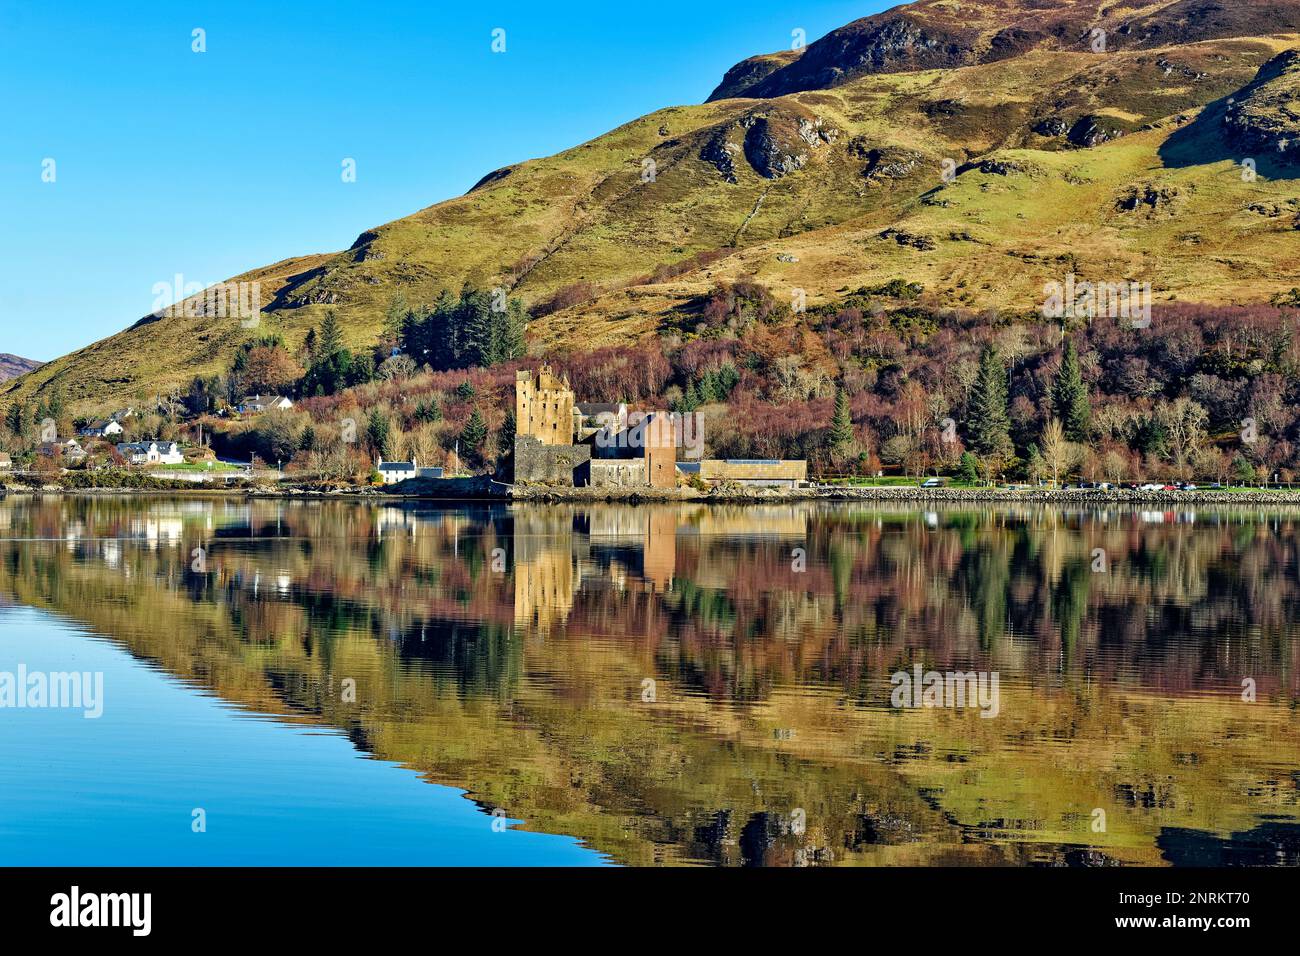 Eilean Donan Castle Loch Duich Scotland colours of the castle hill and birch trees reflected in the sea loch Stock Photo